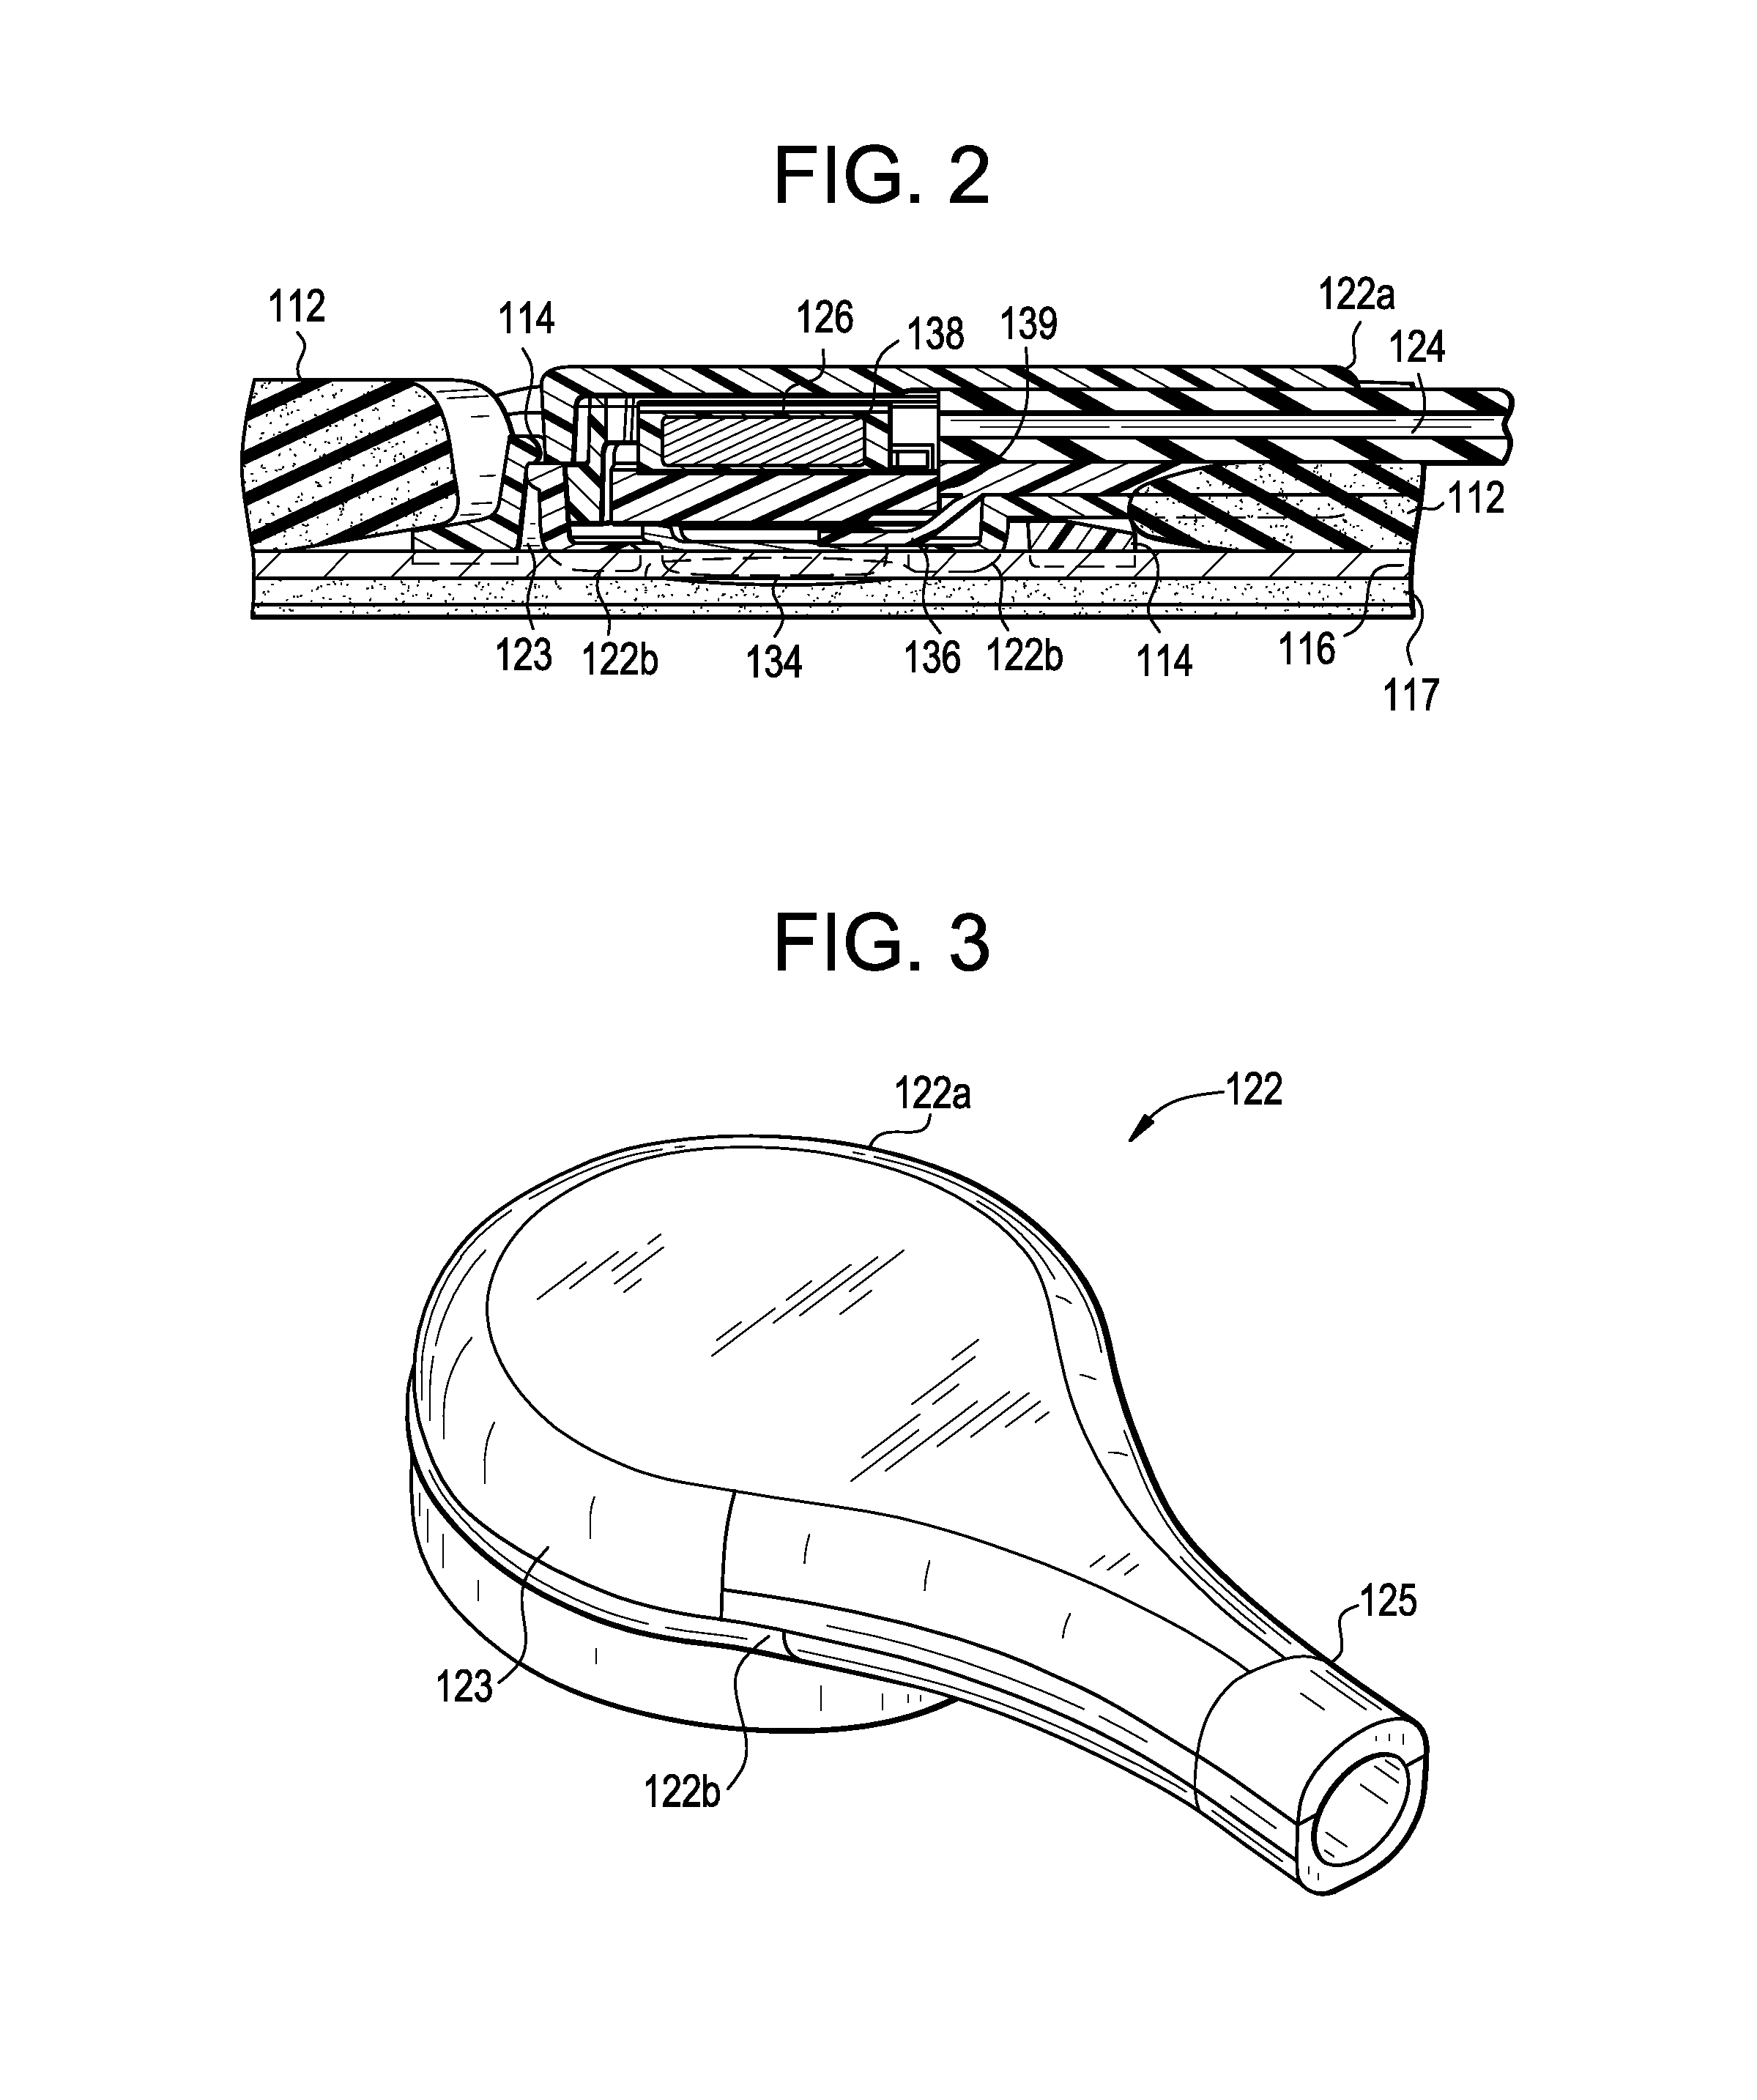 Disposable patch and reusable sensor assembly for use in medical device localization and mapping systems